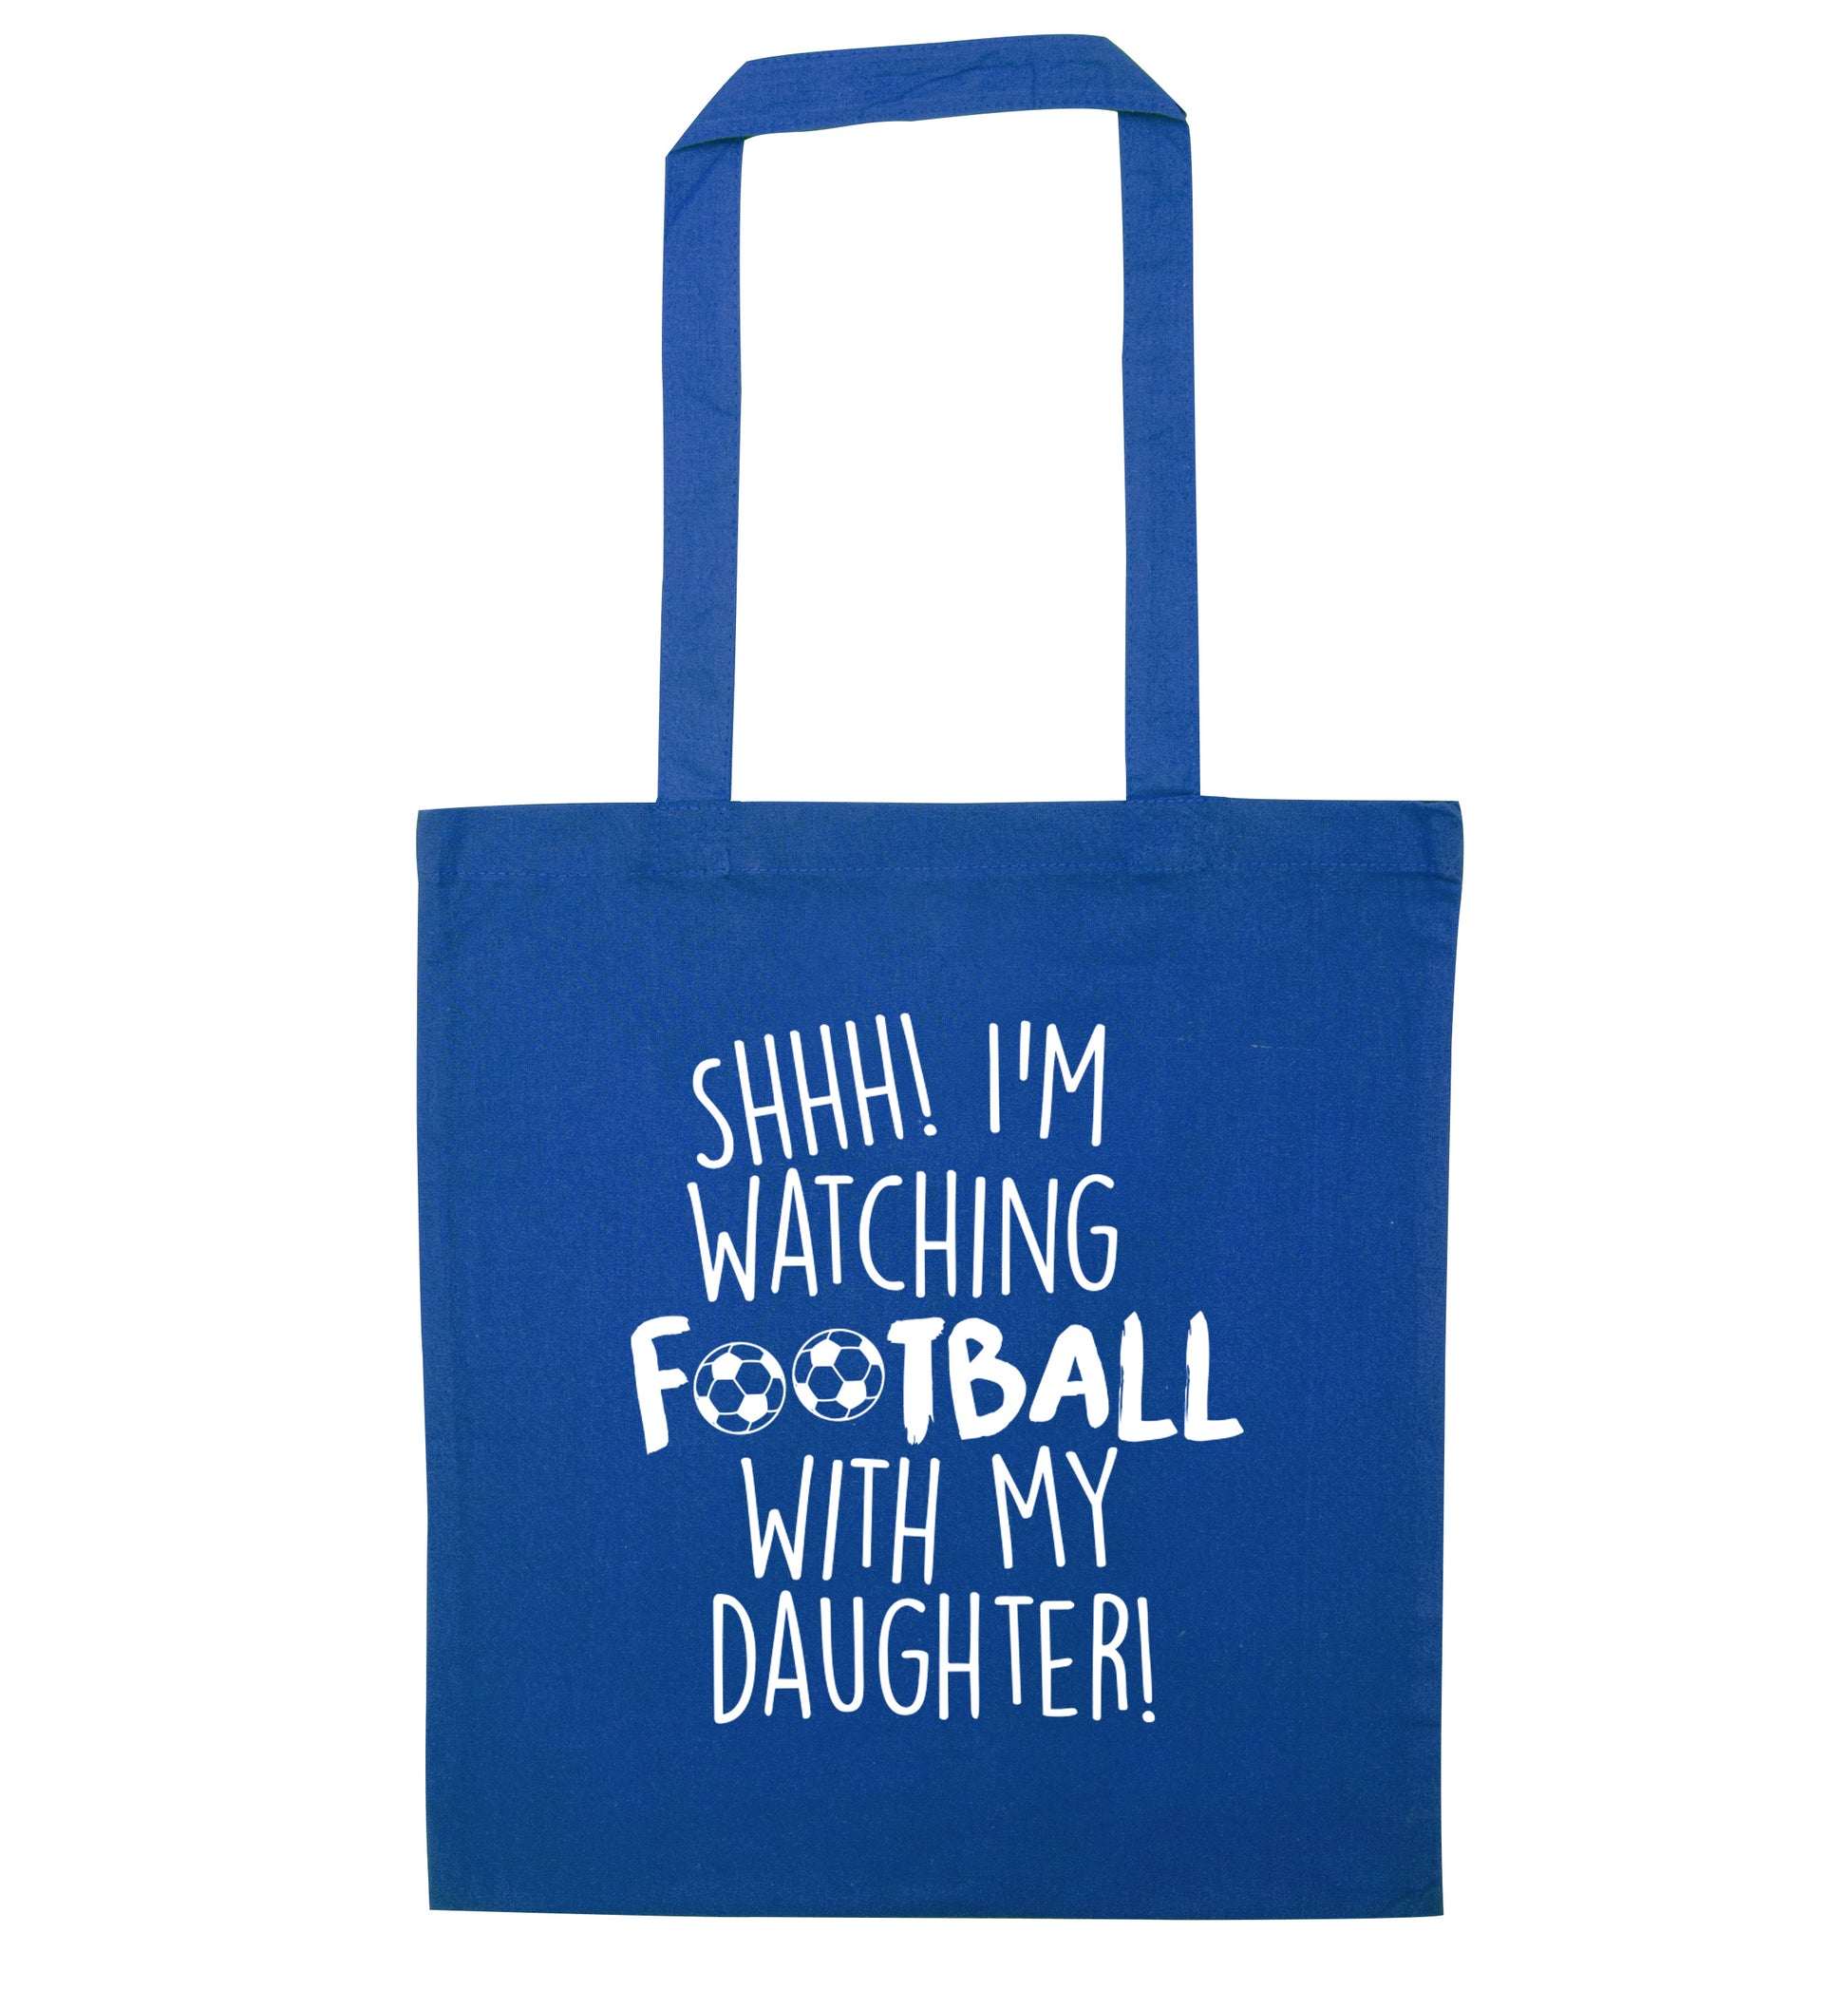 Shhh I'm watching football with my daughter blue tote bag